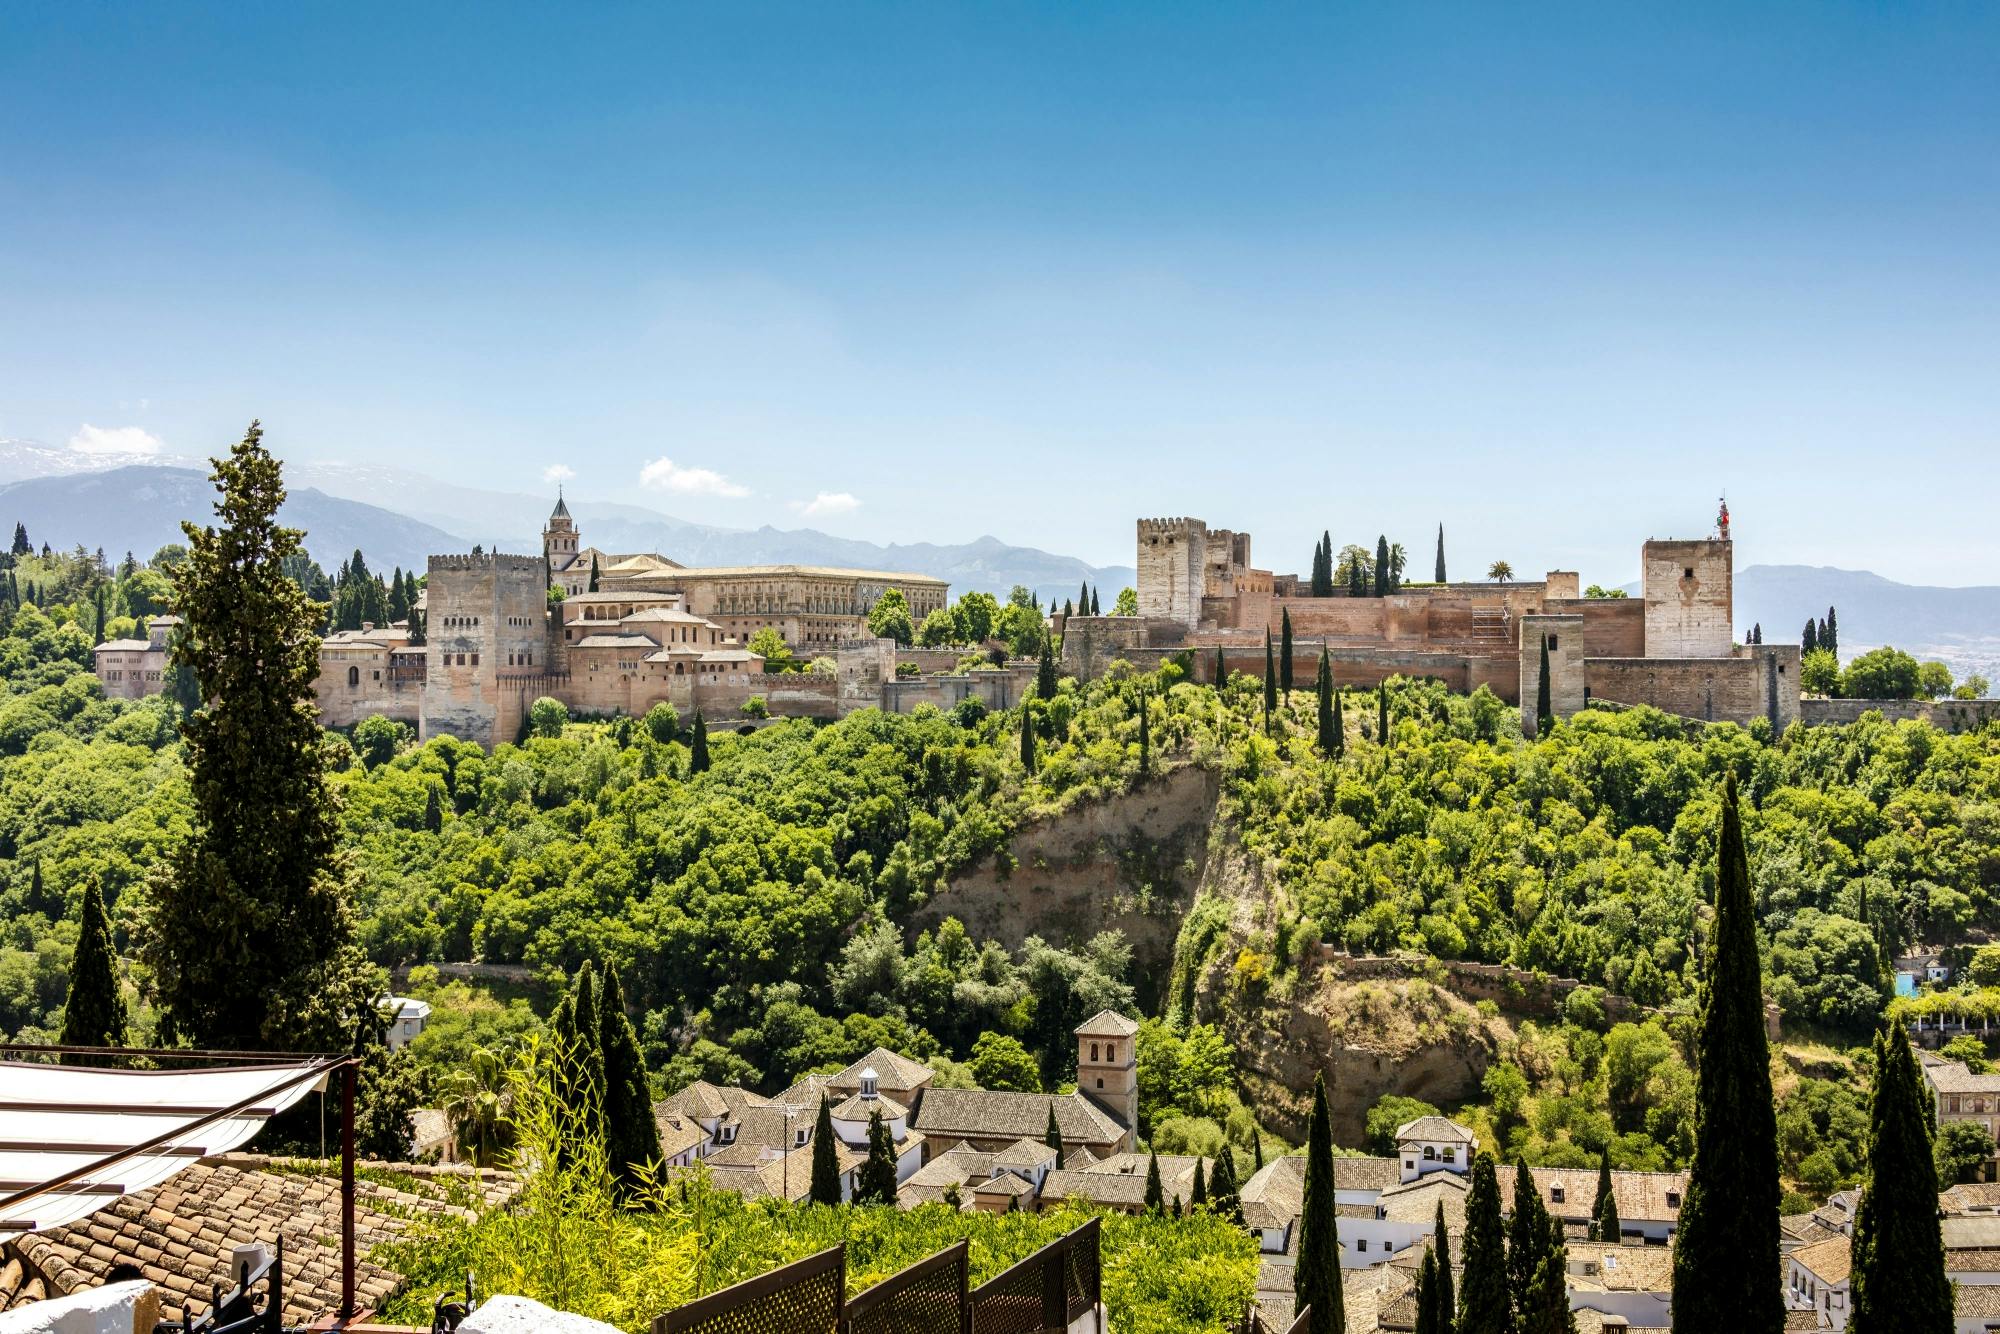 Alhambra and Nasrid Palace skip the line tickets & official guided tour